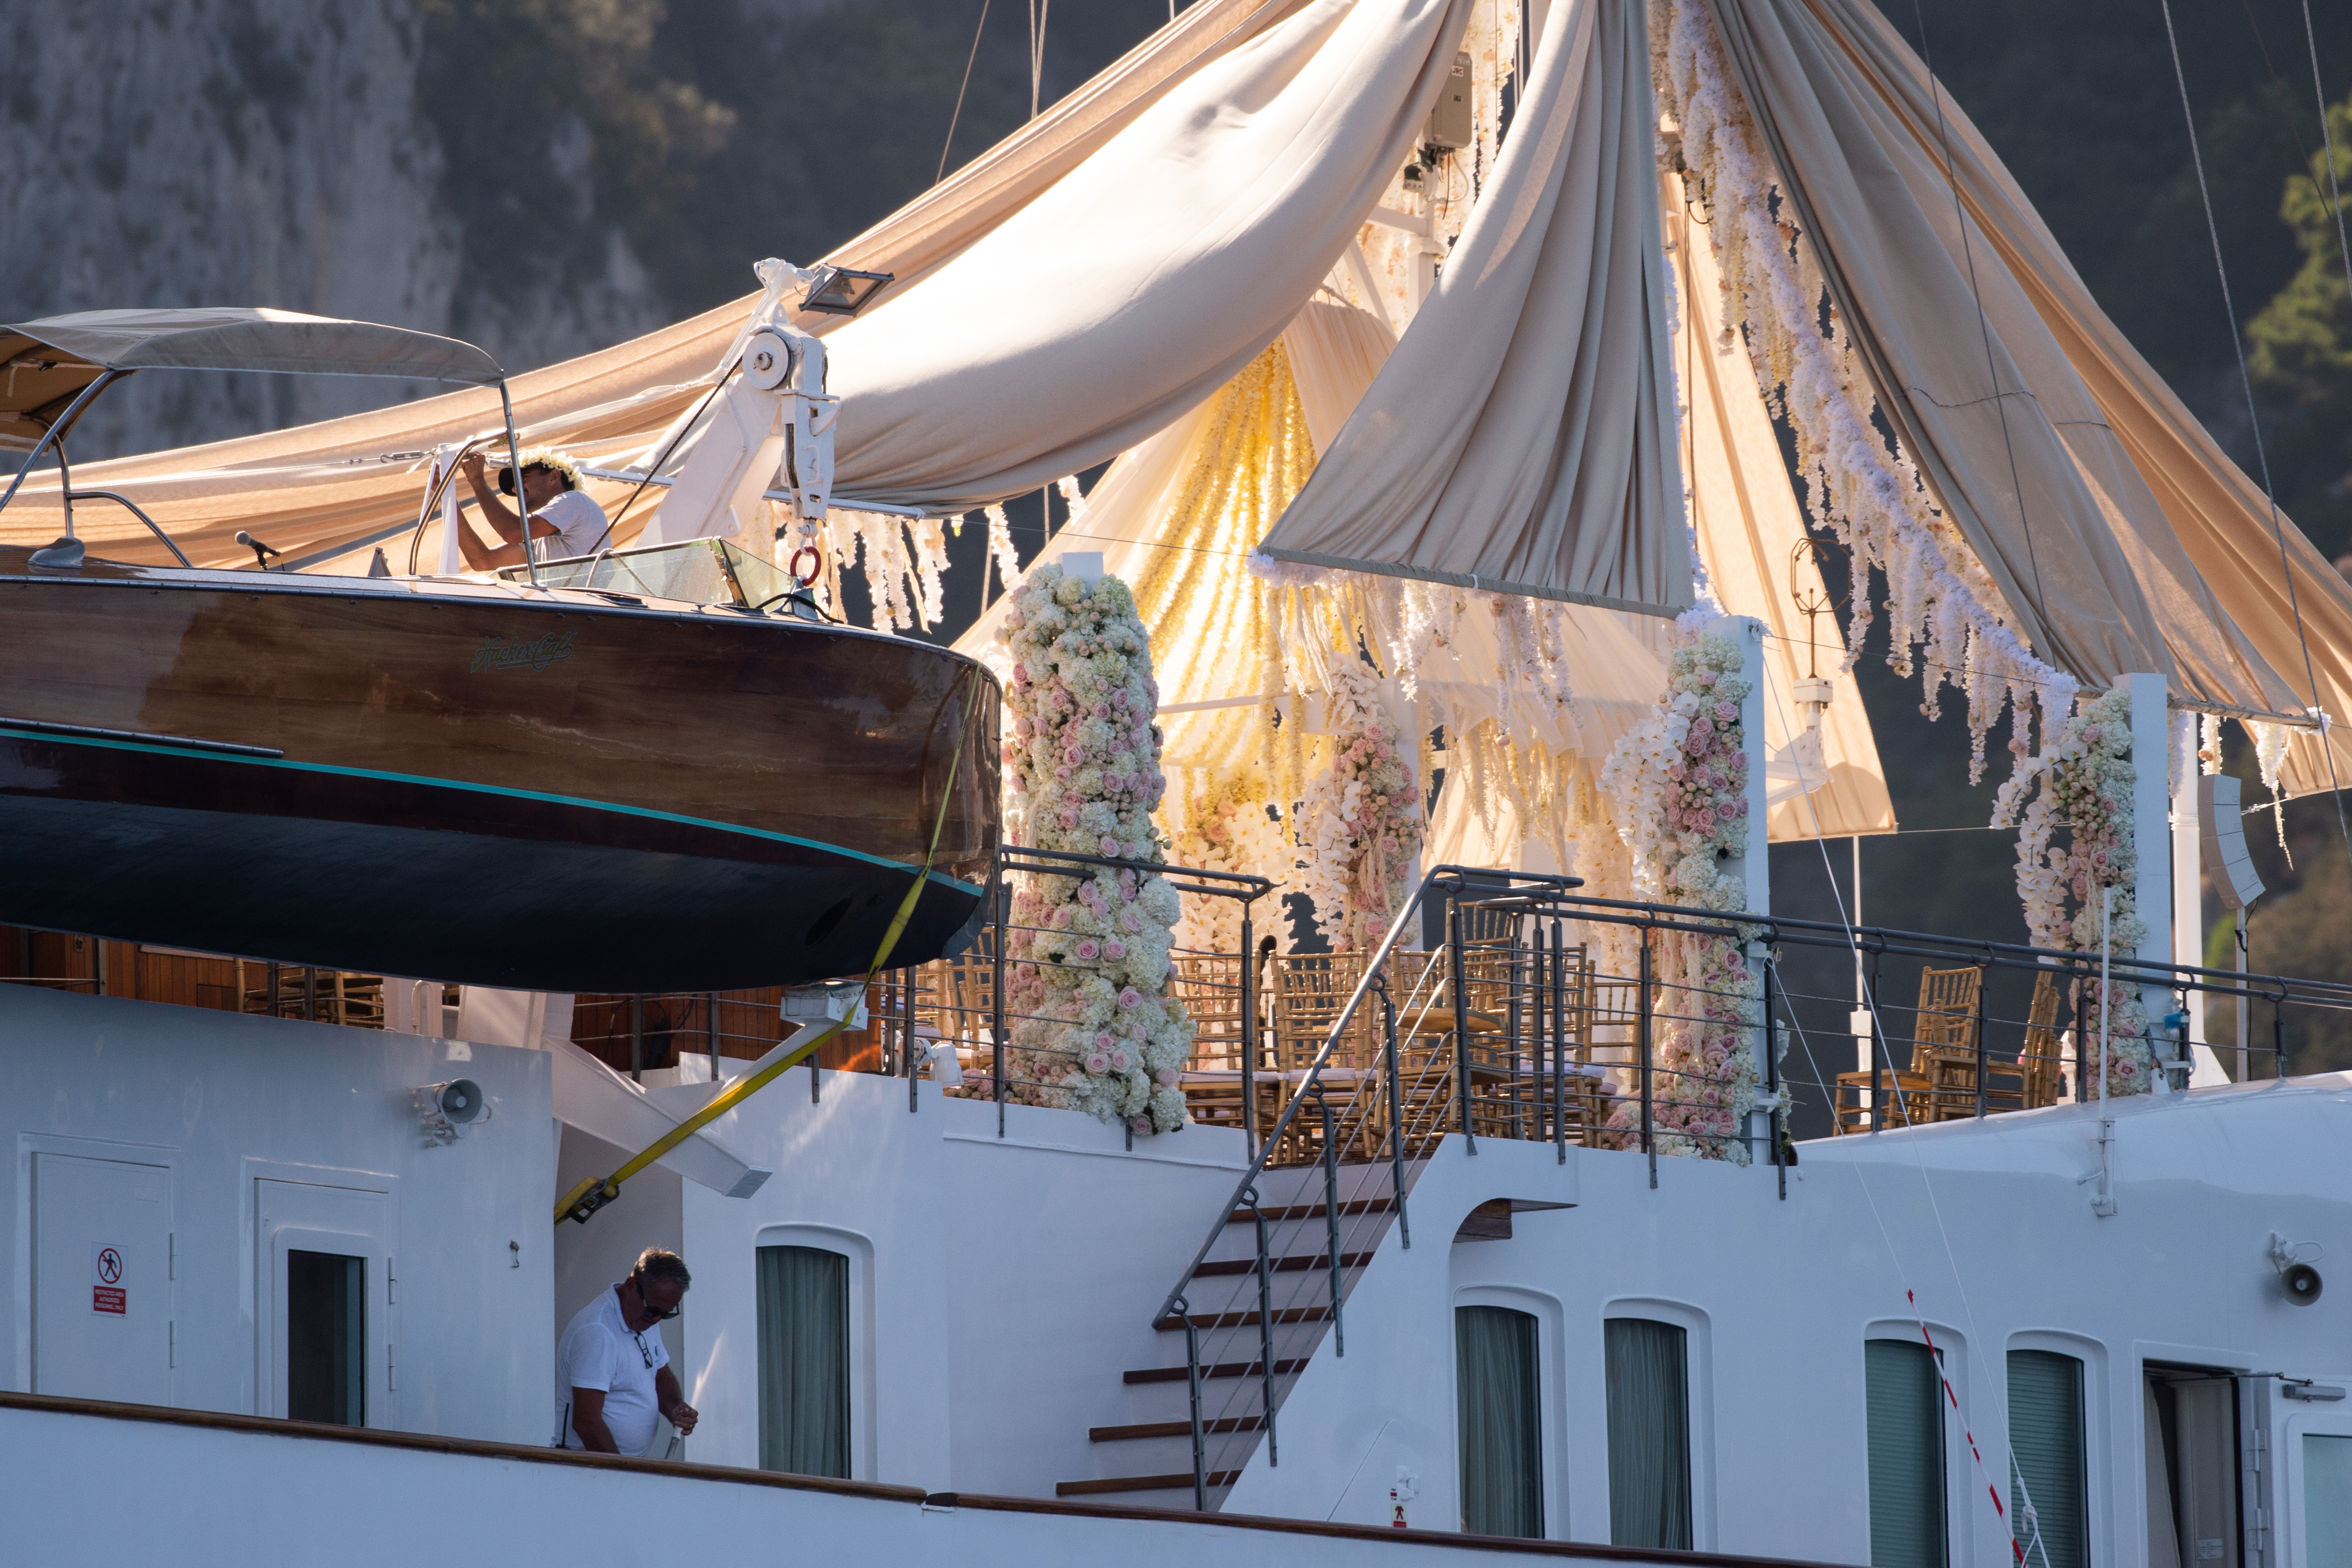 A picture of a yacht being prepared for Heidi Klum and Tom Kaulitz's wedding in Capri, Italy on August 3, 2019 | Source: Getty Images